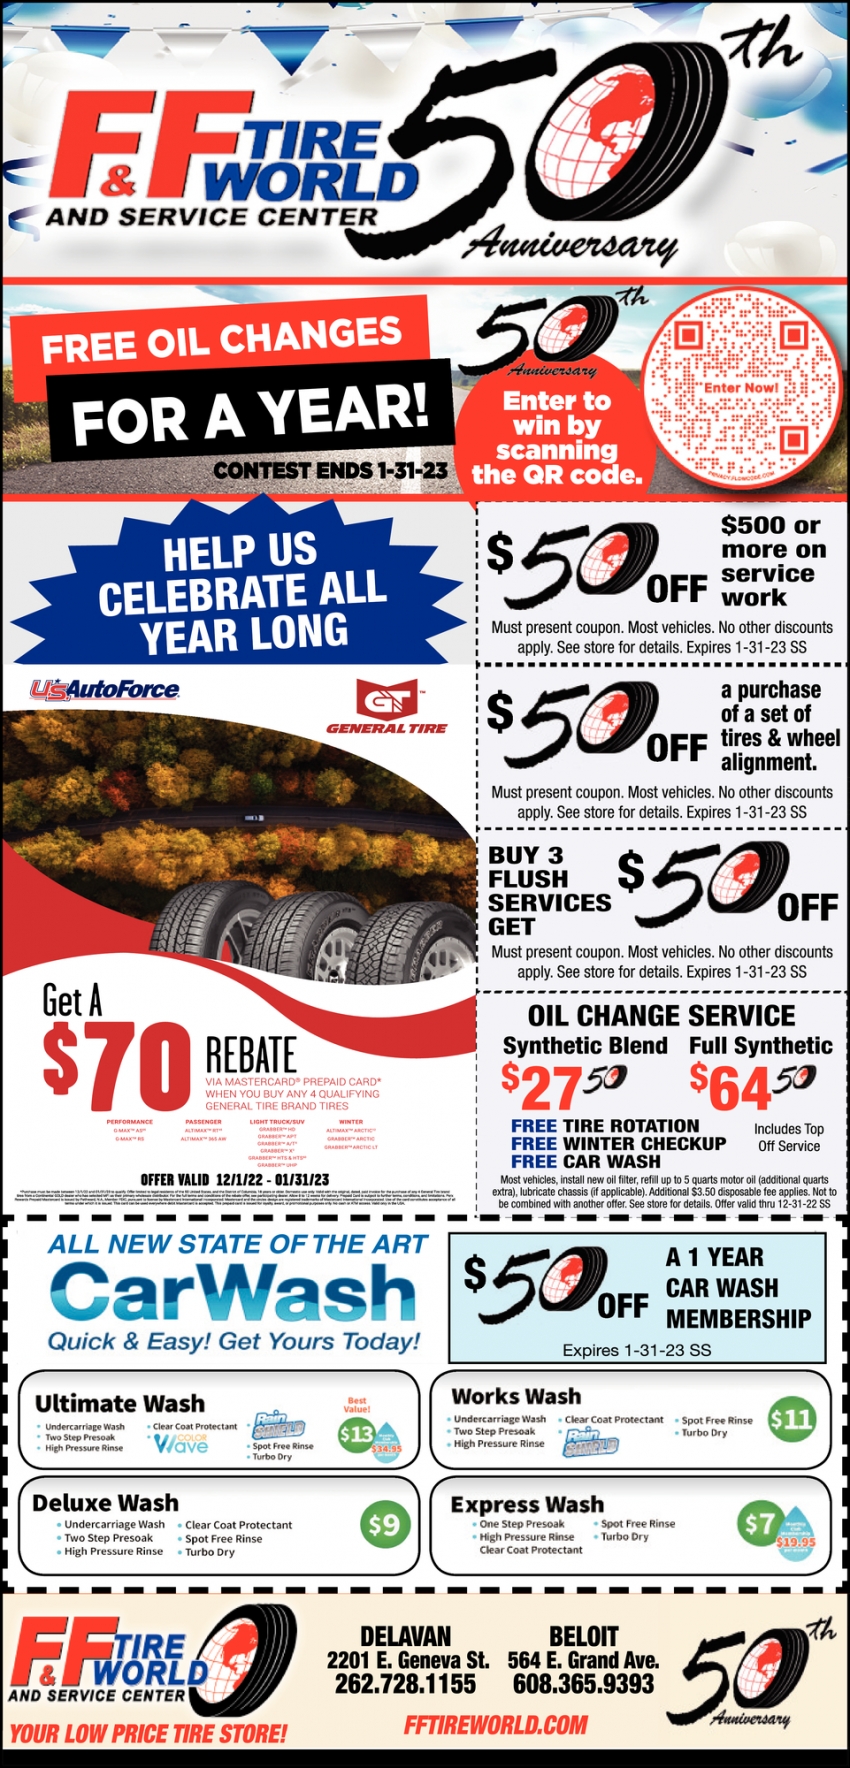 Free Oil Changes For A Year!